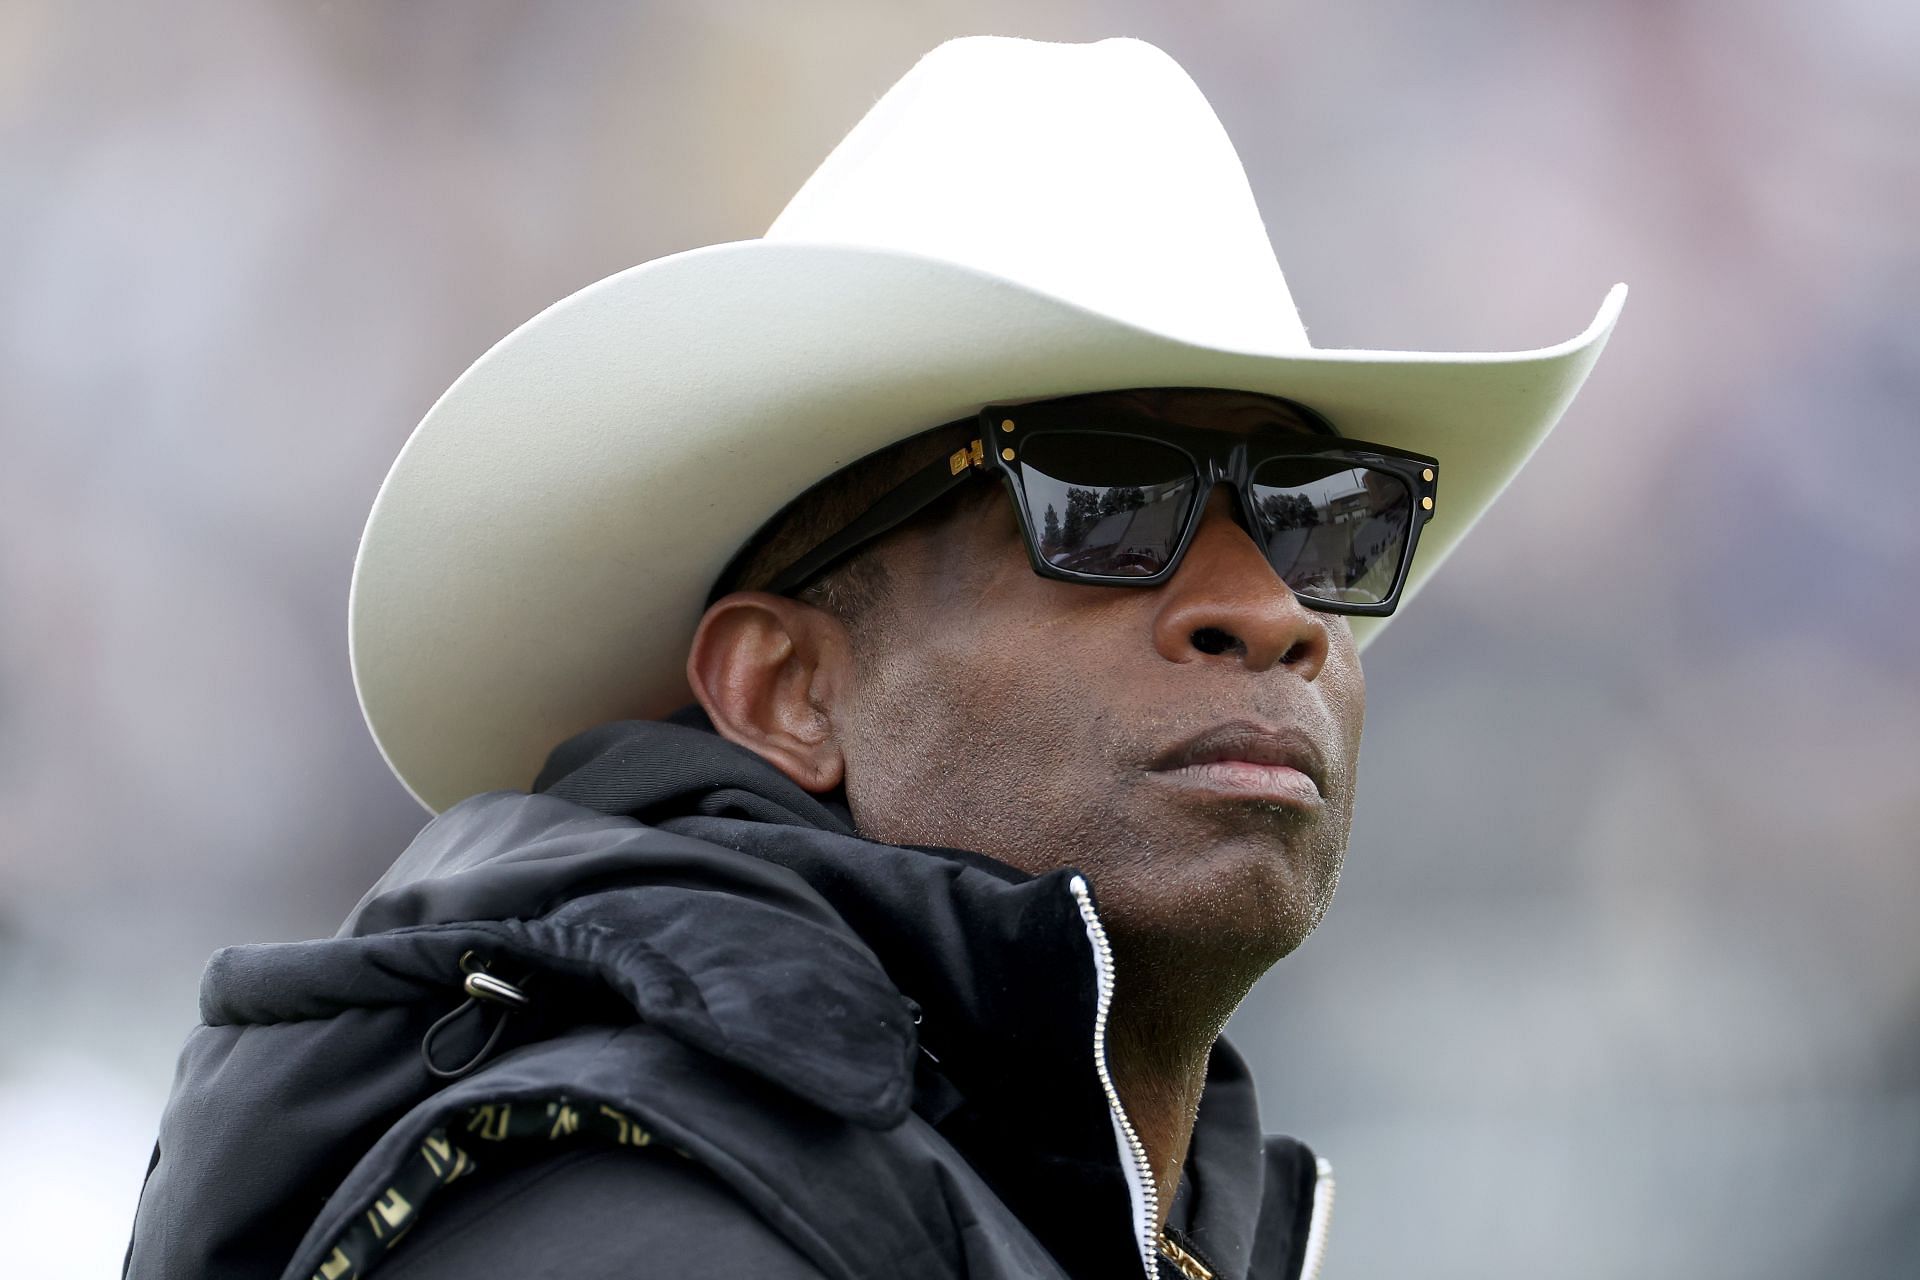 Deion Sanders Salary, Contract, Net Worth, and More